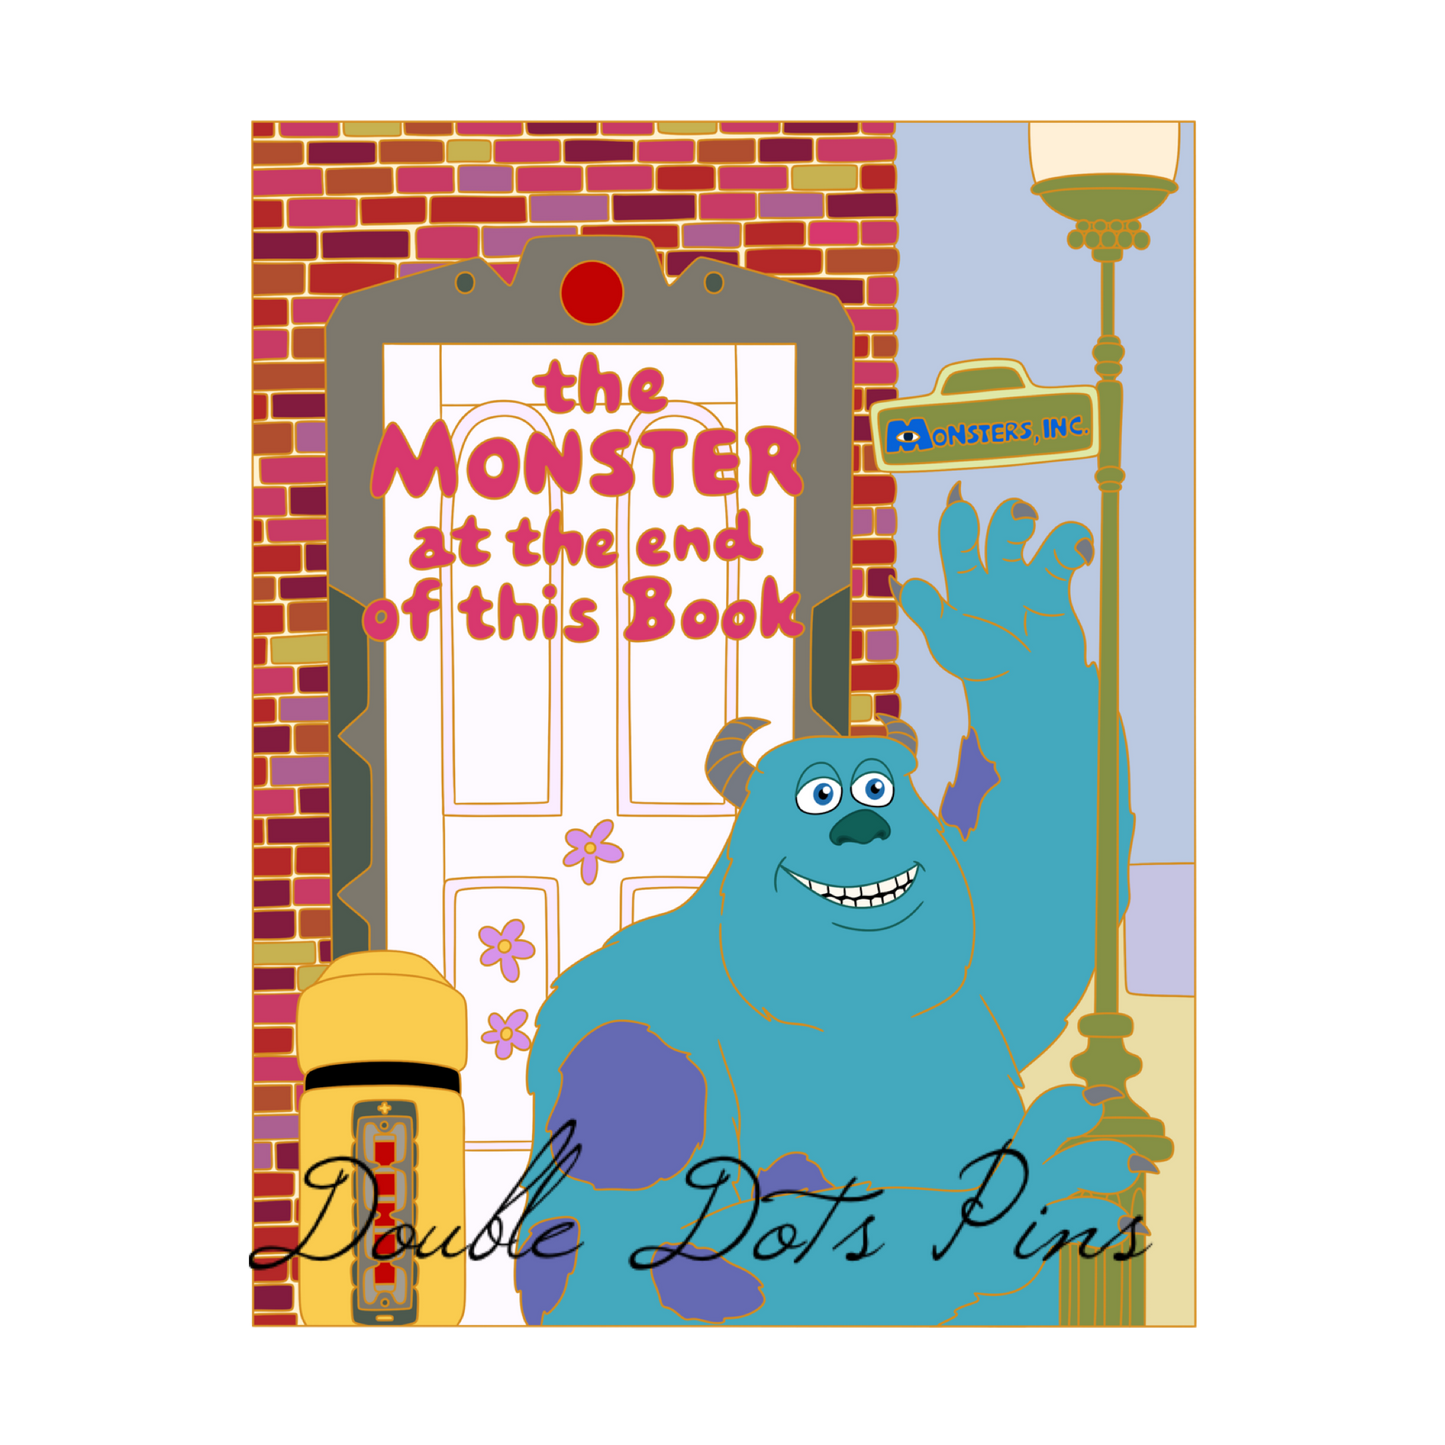 PRESALE - The Sulley at the End of this Book